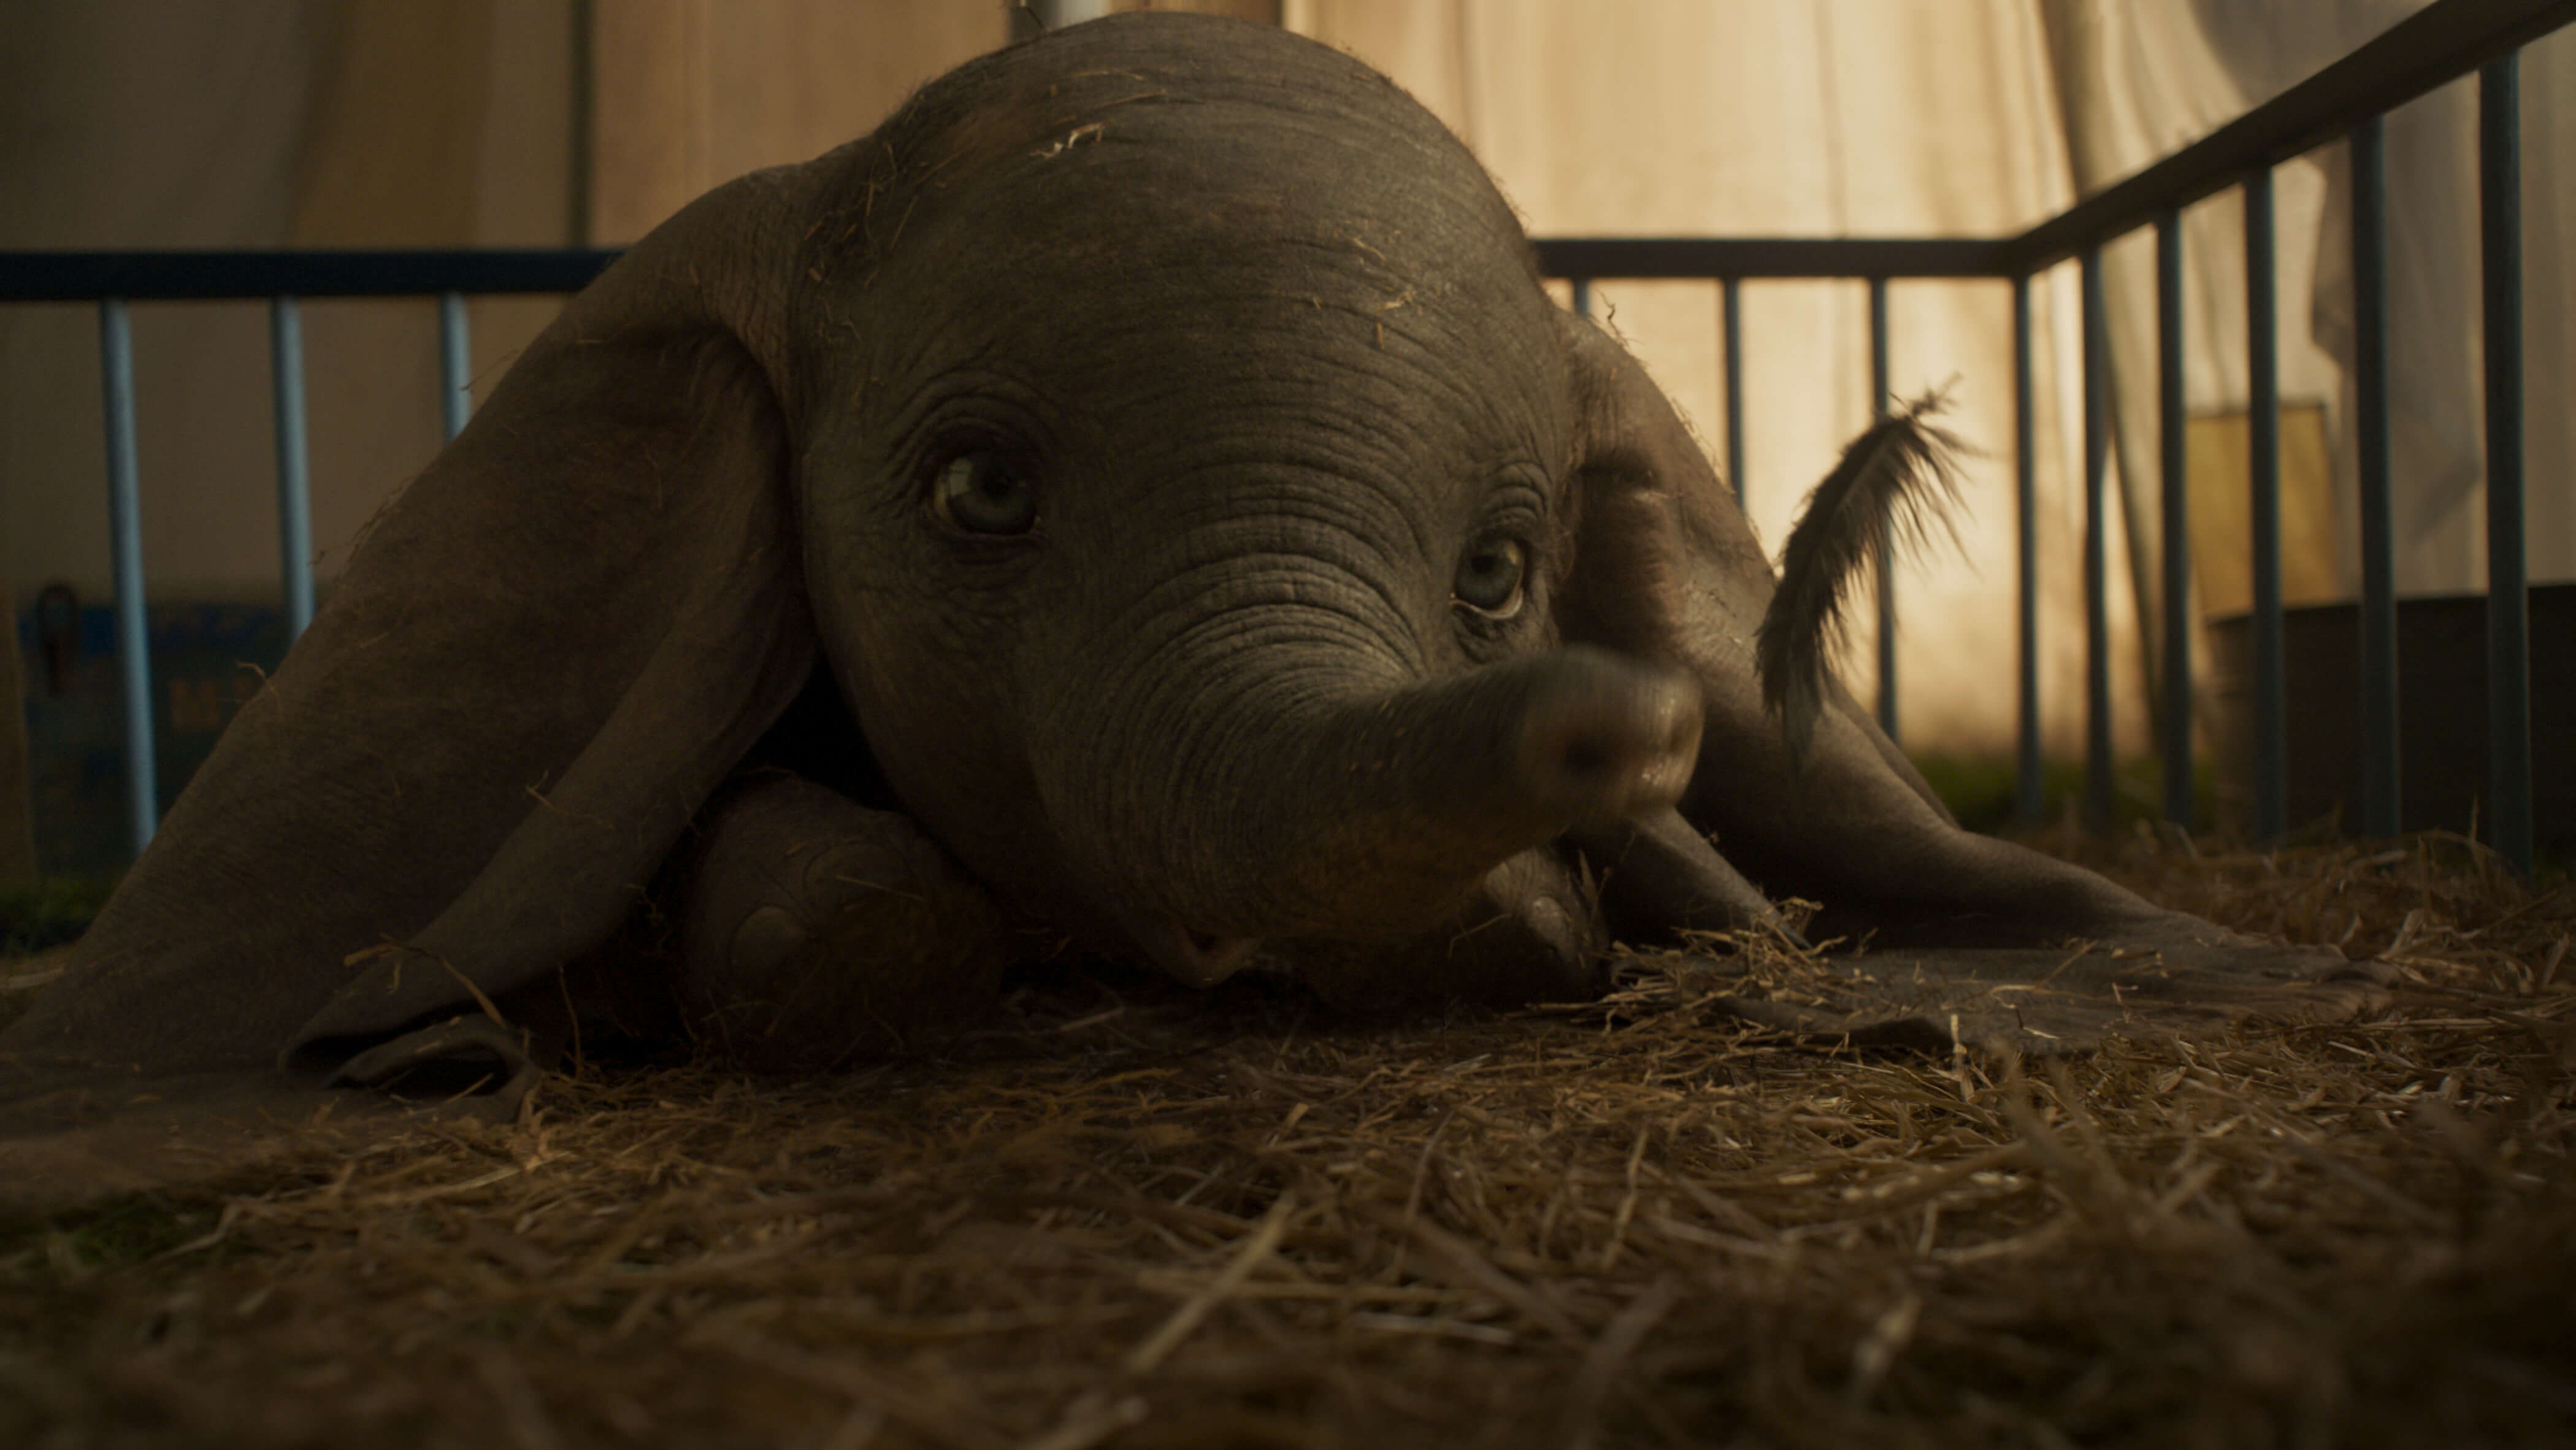 New Trailer And Poster For Live-Action ‘Dumbo’ Released